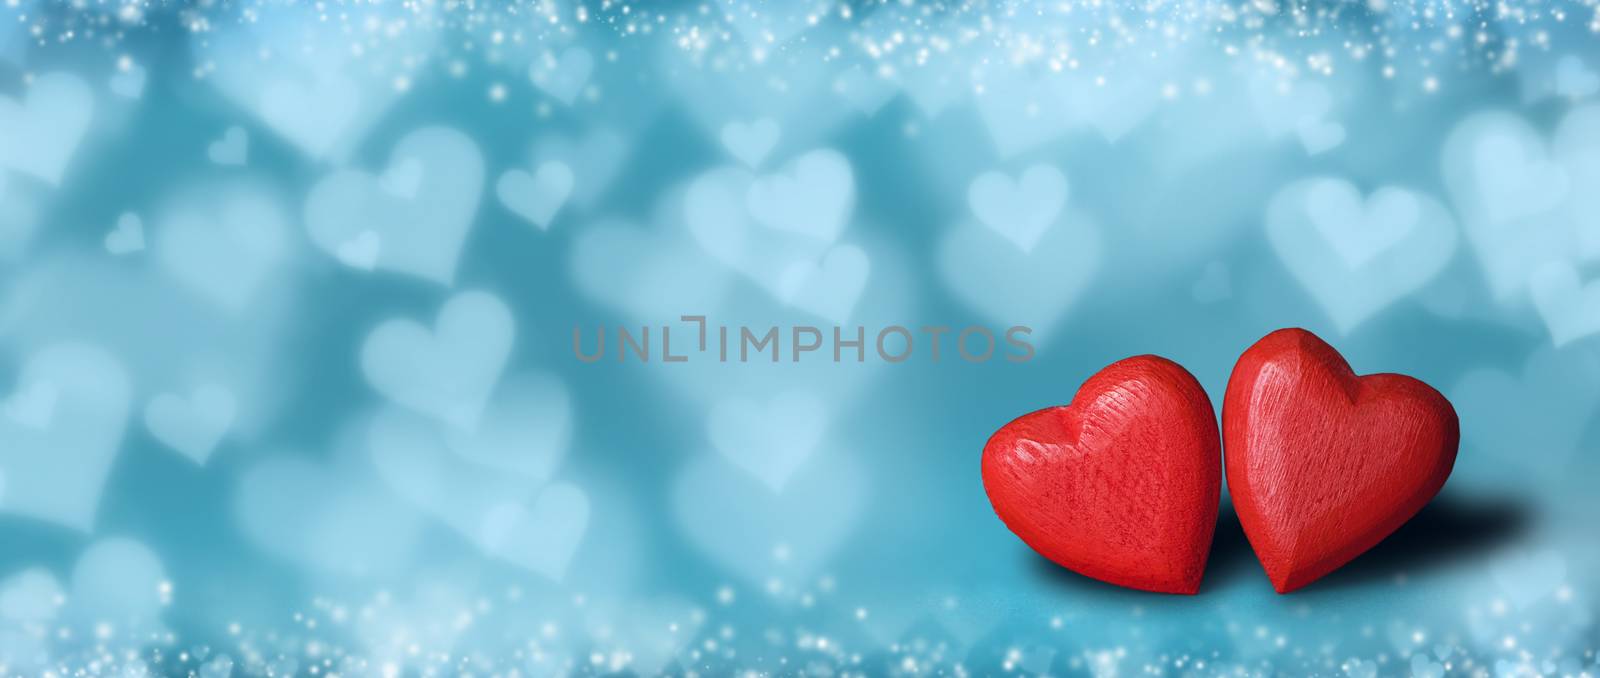 Two red hearts on bokeh background by Yellowj